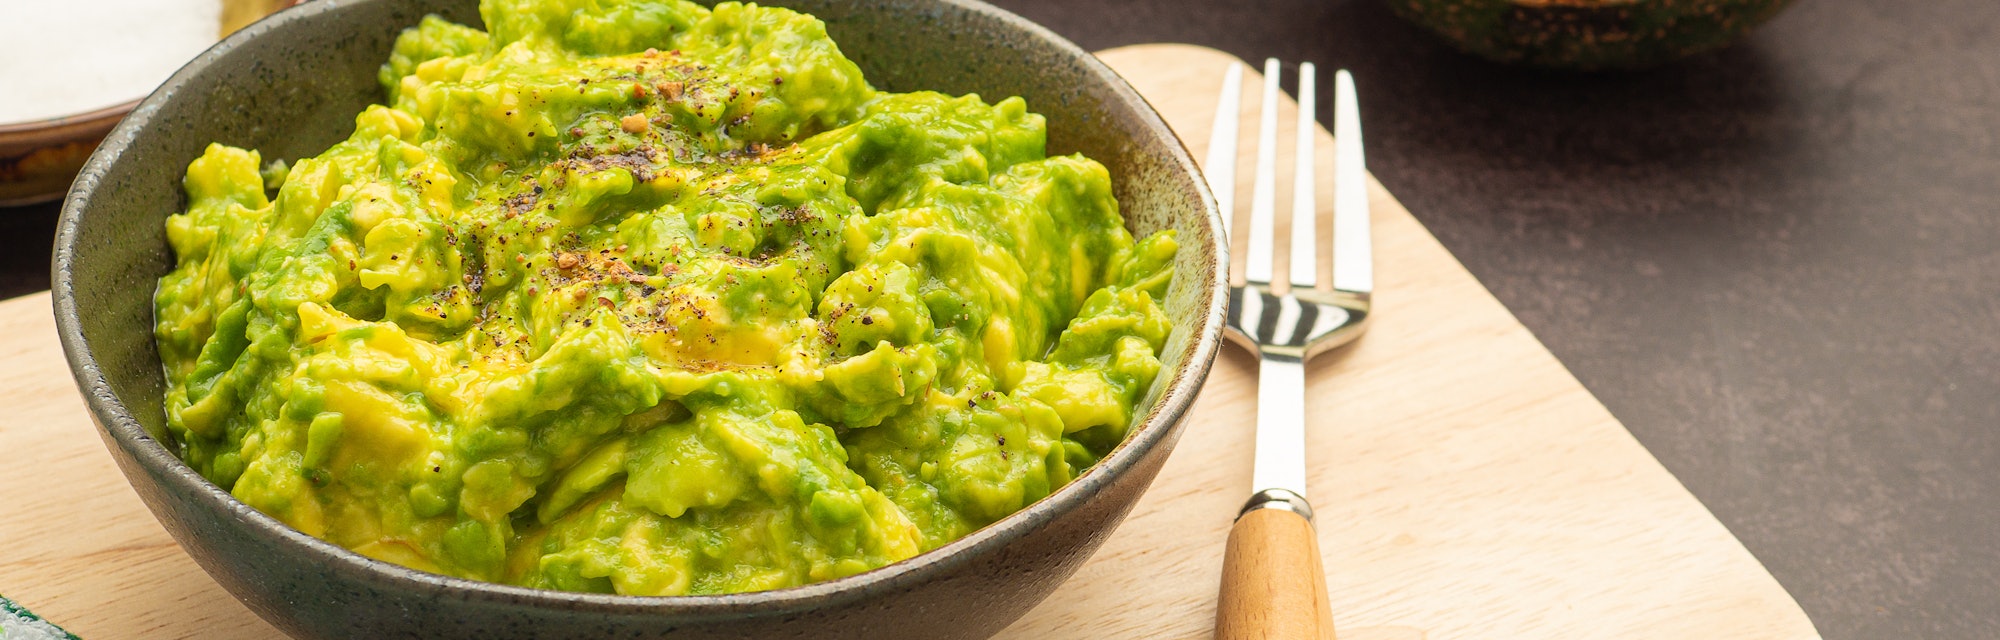  Dr. Schaich - DO AVOCADO PITS KEEP GUACAMOLE FRESH? A FOOD SCIENTIST CHIPS AWAY AT THE MYTH